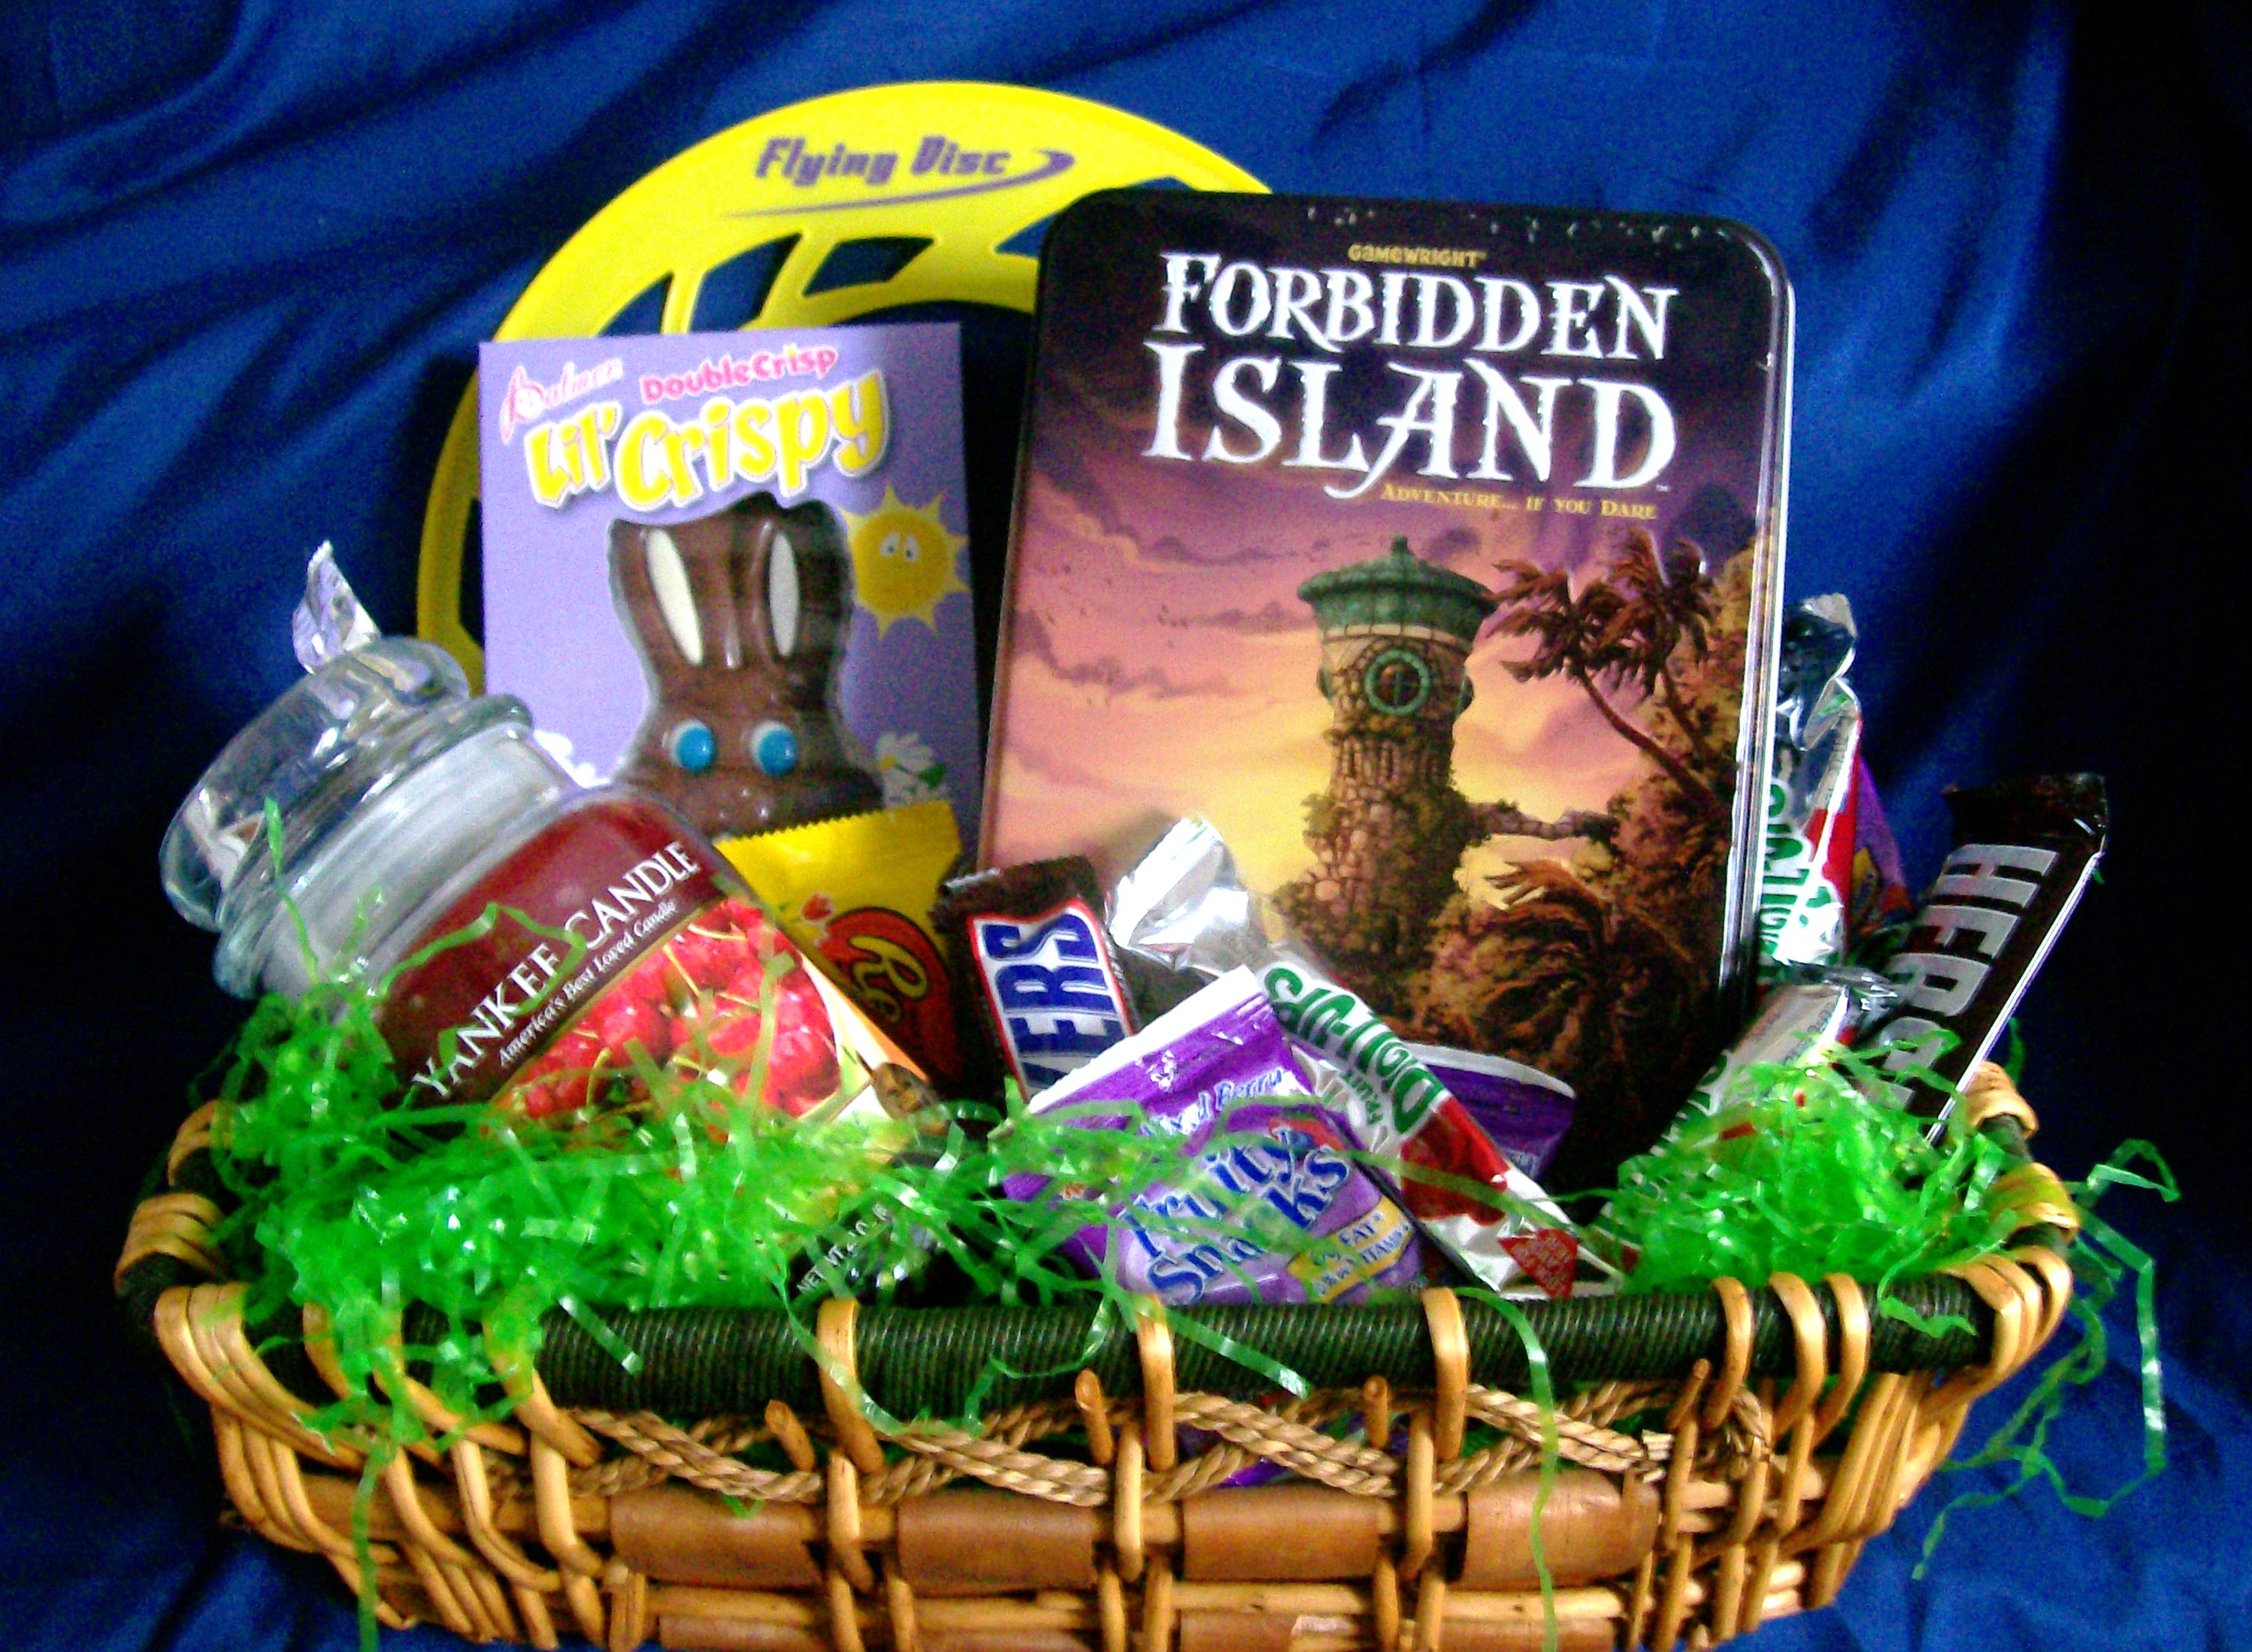 10 Fun and Games Ideas for Easter Baskets (or Any Time of Year)